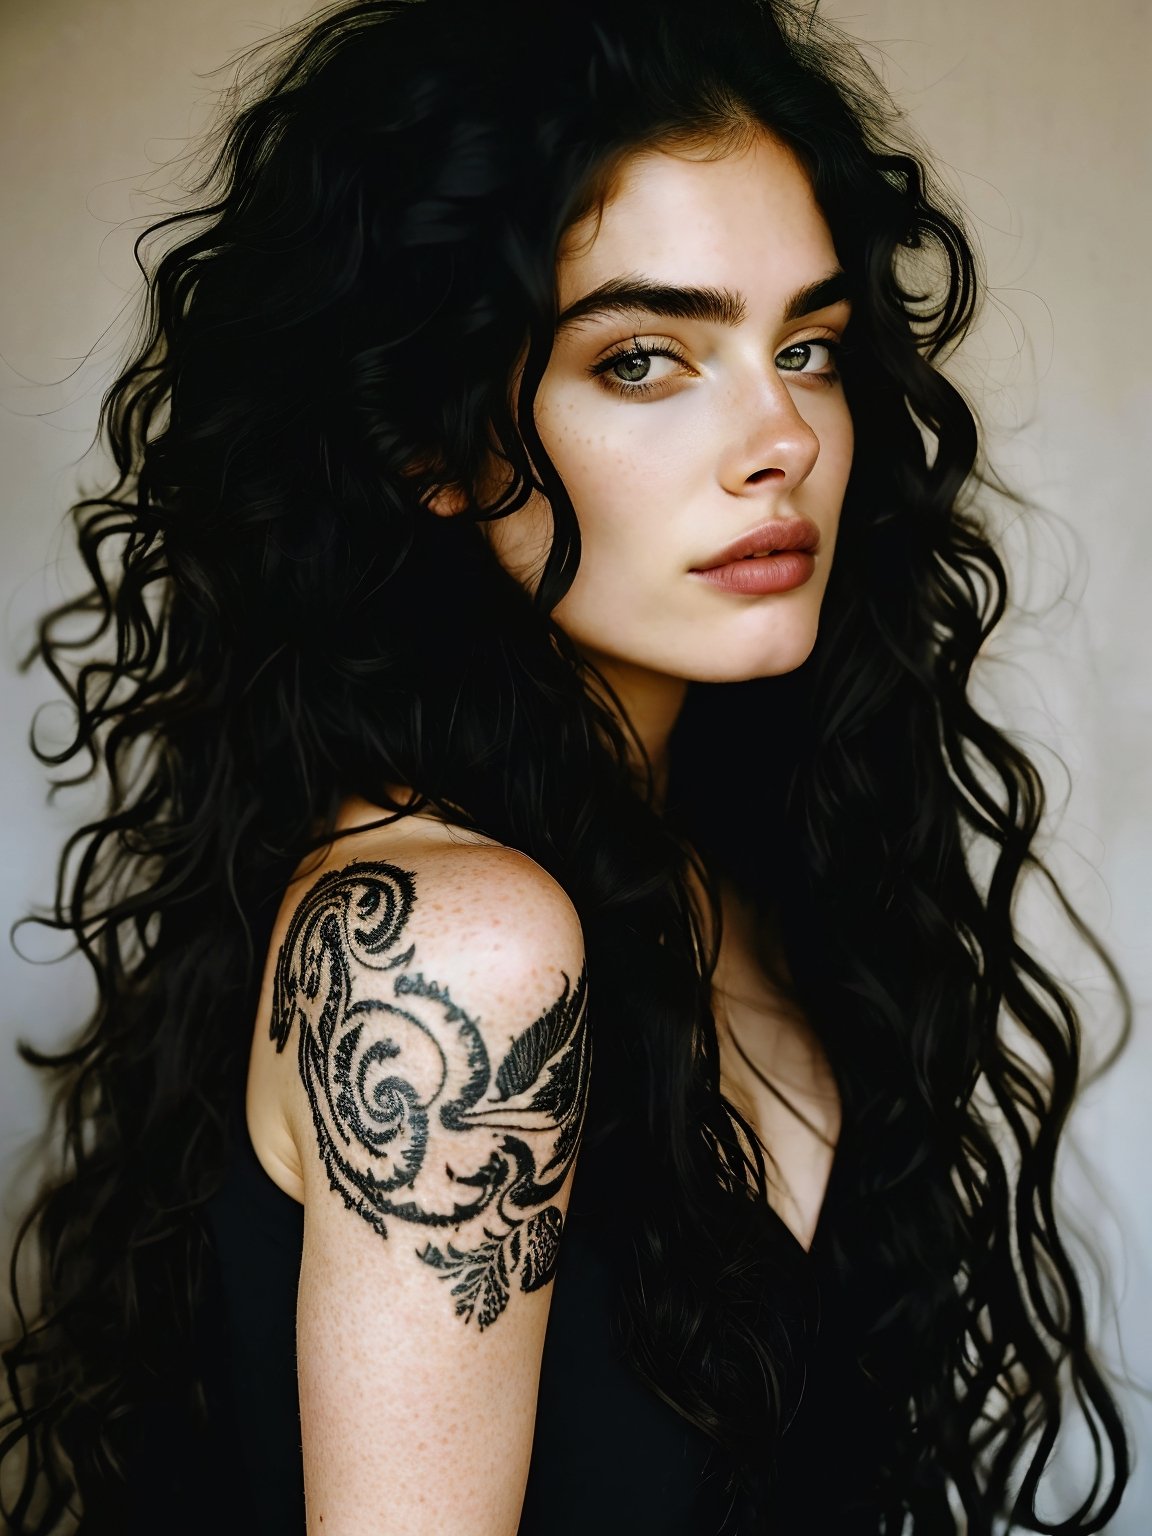 Best quality, masterpiece, super high resolution, (realism: 1.4), face , tattoos ((, black curly hair, long hair)) , pale skin, bedhead, goth, happy 